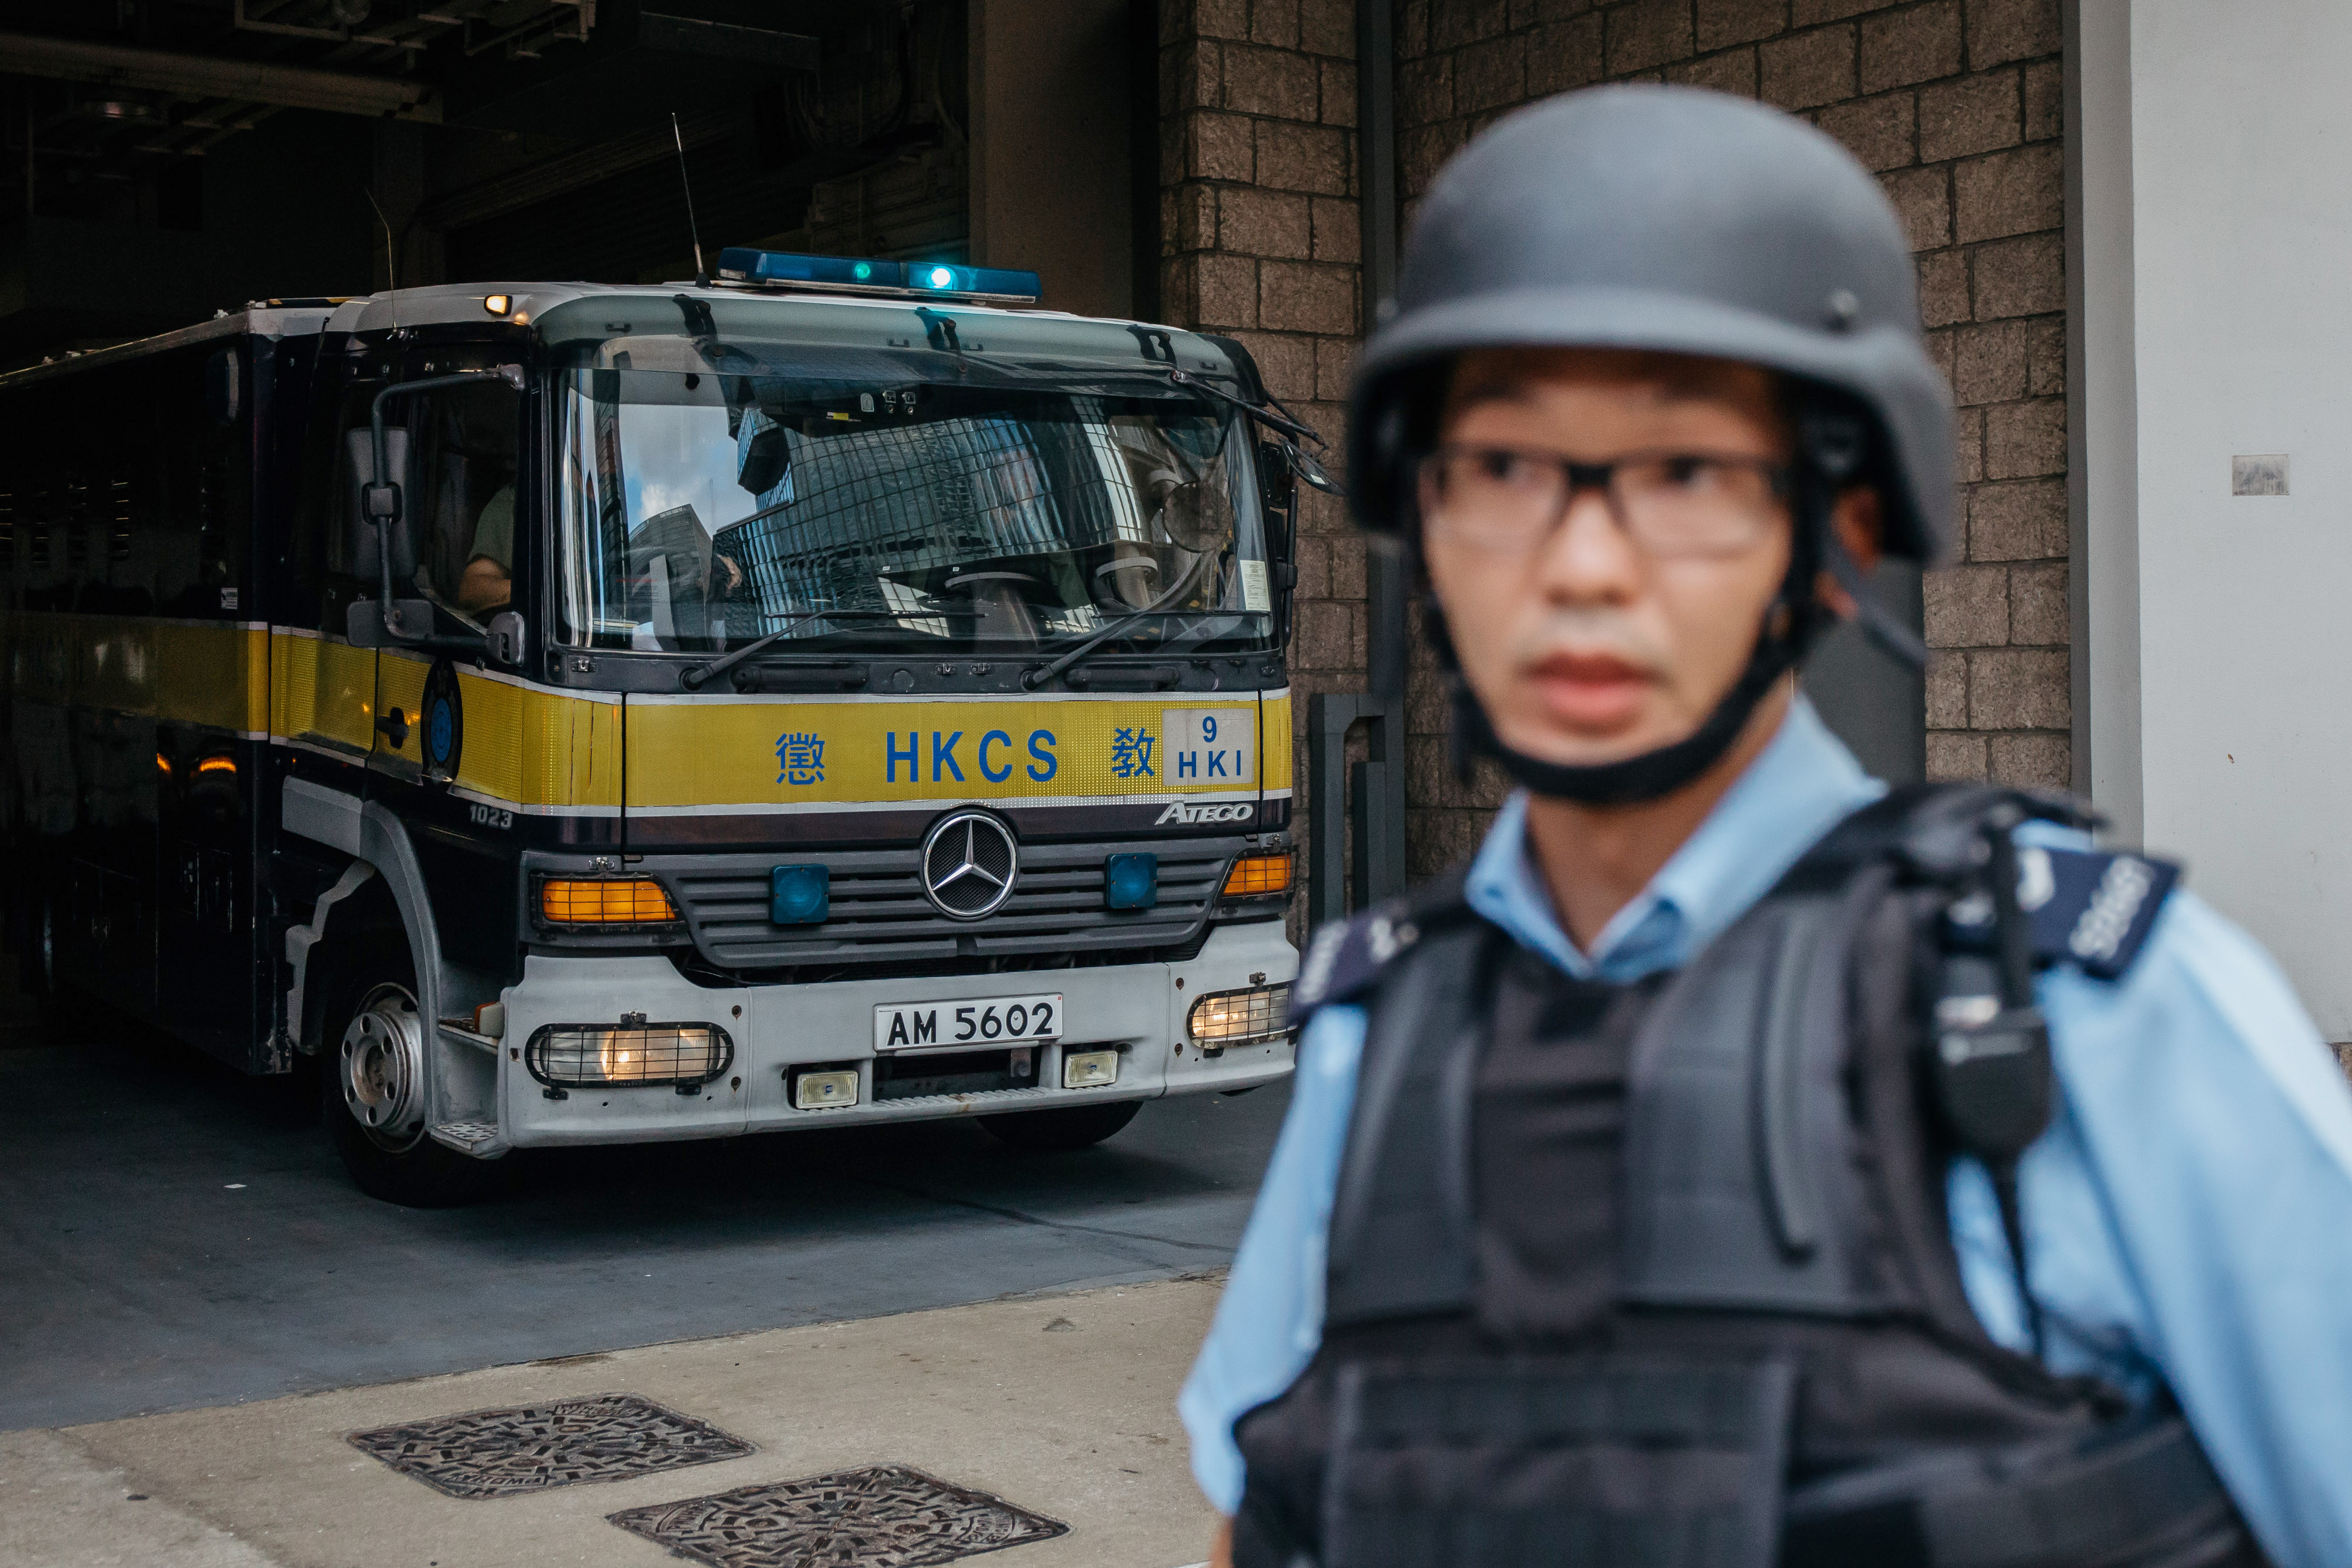 A police officer stands guard as a prison vehicle escorting Rurik Jutting, a former Bank of America Merrill Lynch employee, leaves the High Court in Hong Kong on Oct. 24, 2016 (Bloomberg/Getty Images)